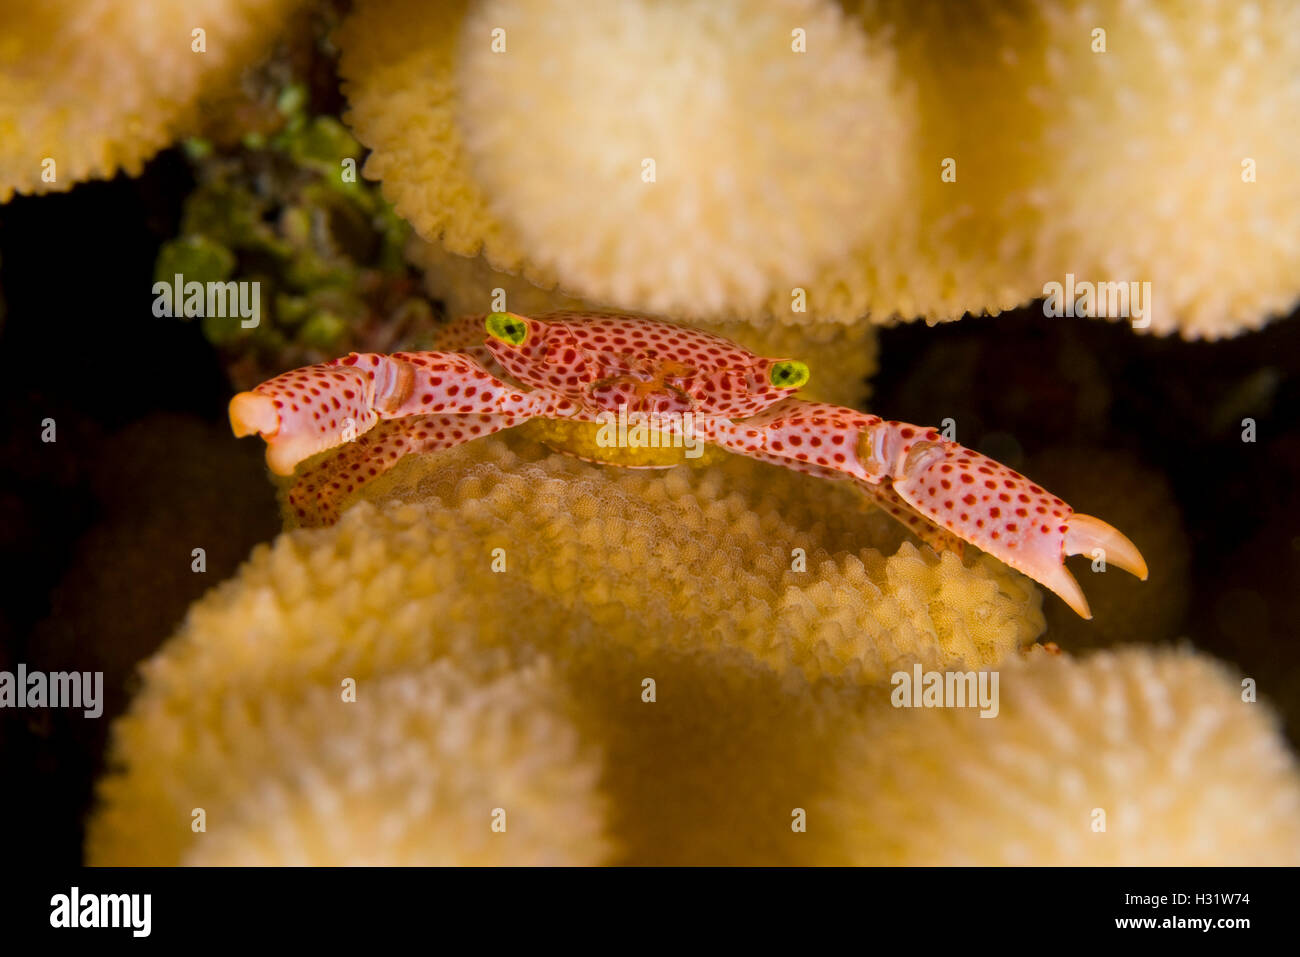 QZ73742-D. Rust-Spotted Guard Crab (Trapezia rufopunctata). Note it is carrying eggs. A 1” wide commensal crab in Pocillopora br Stock Photo